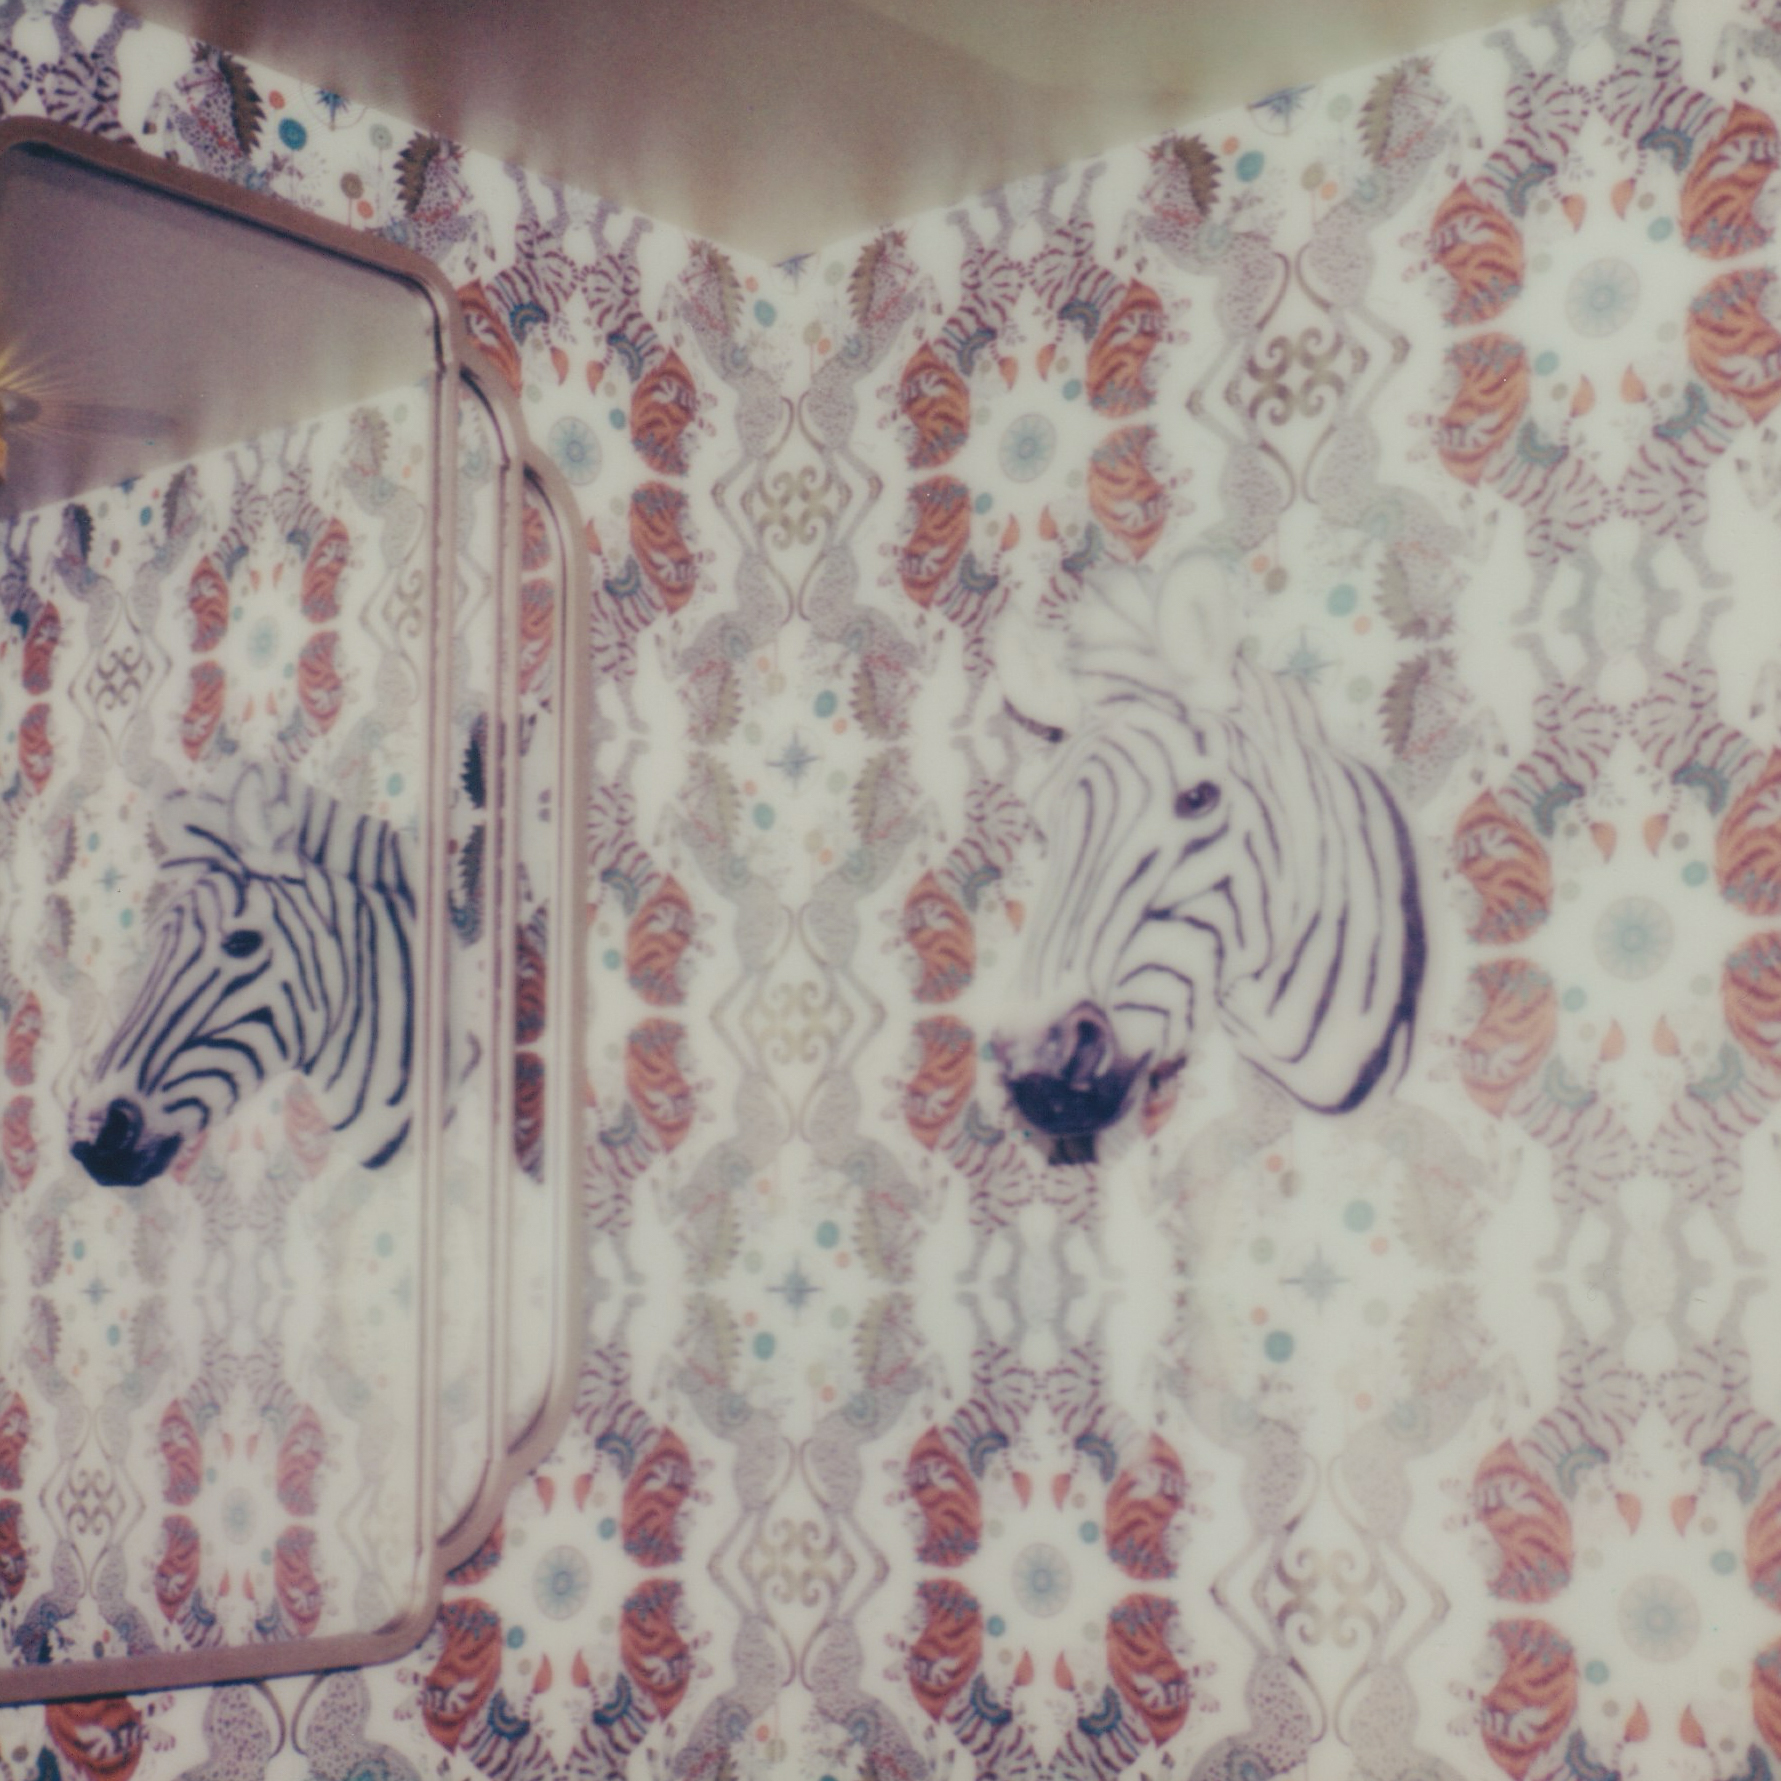 a mirror with zebra heads on the wall